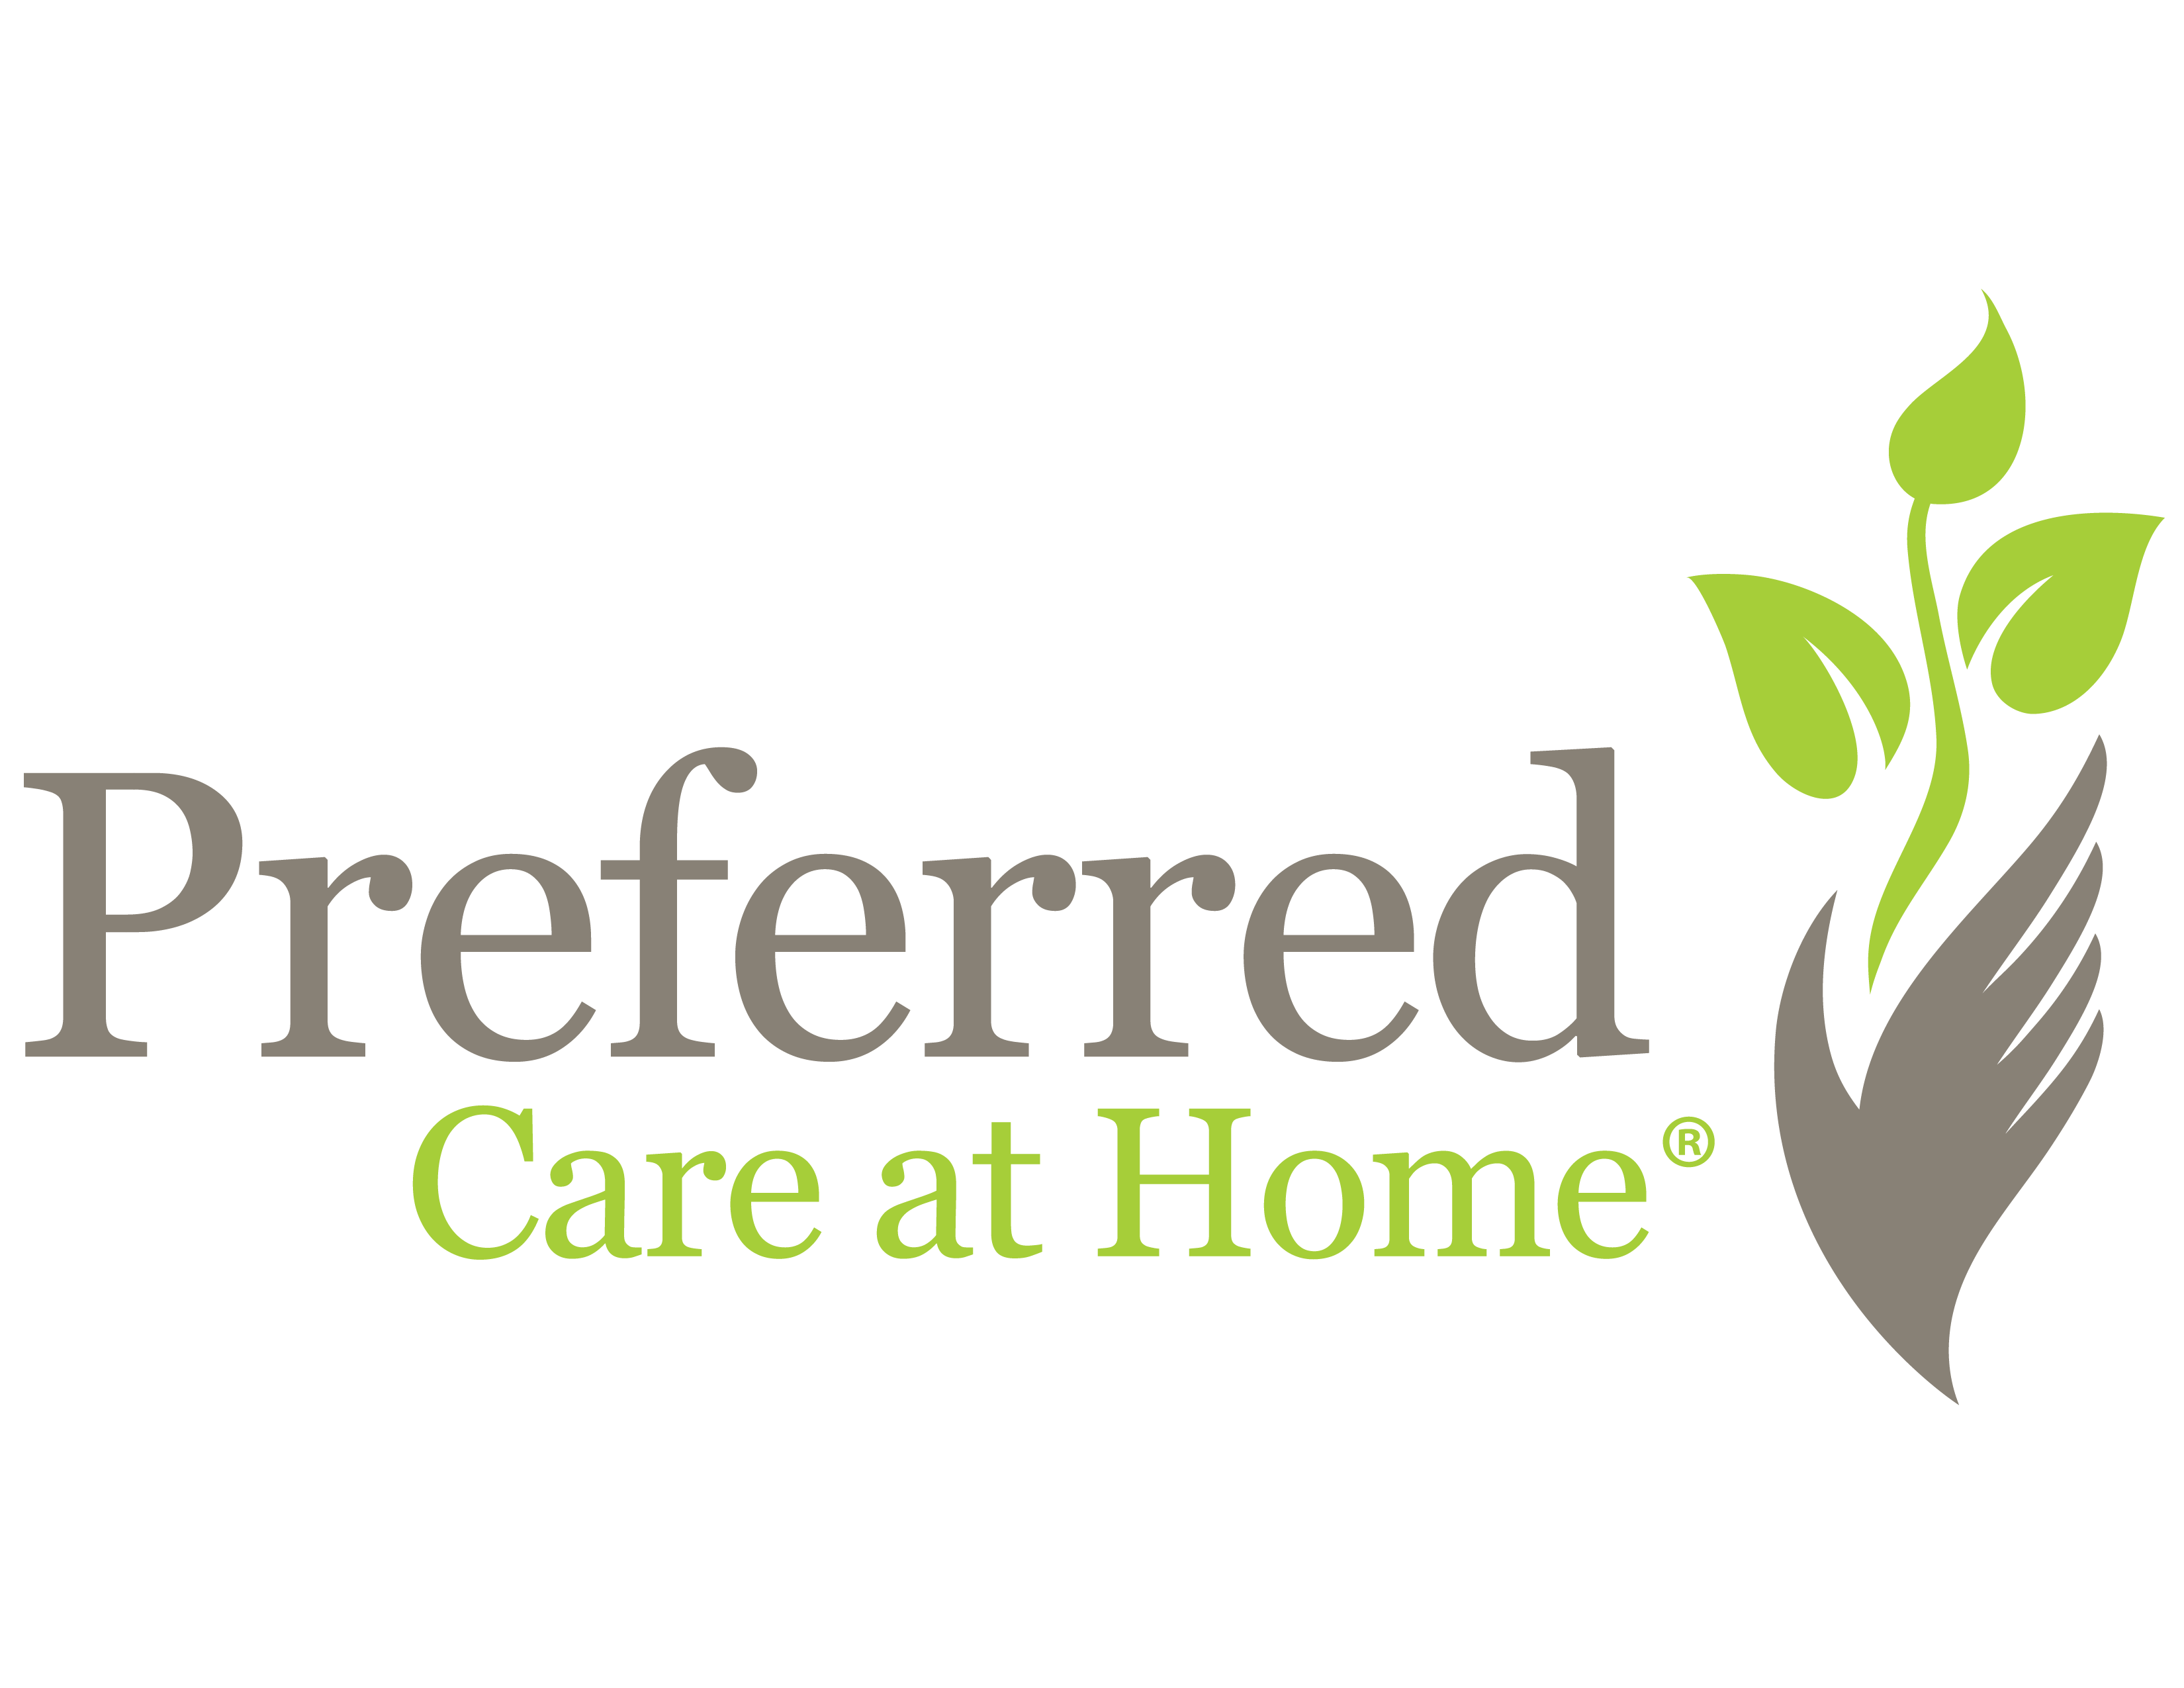 Preferred Care at Home of Metrowest Boston, MA at Framingham, MA